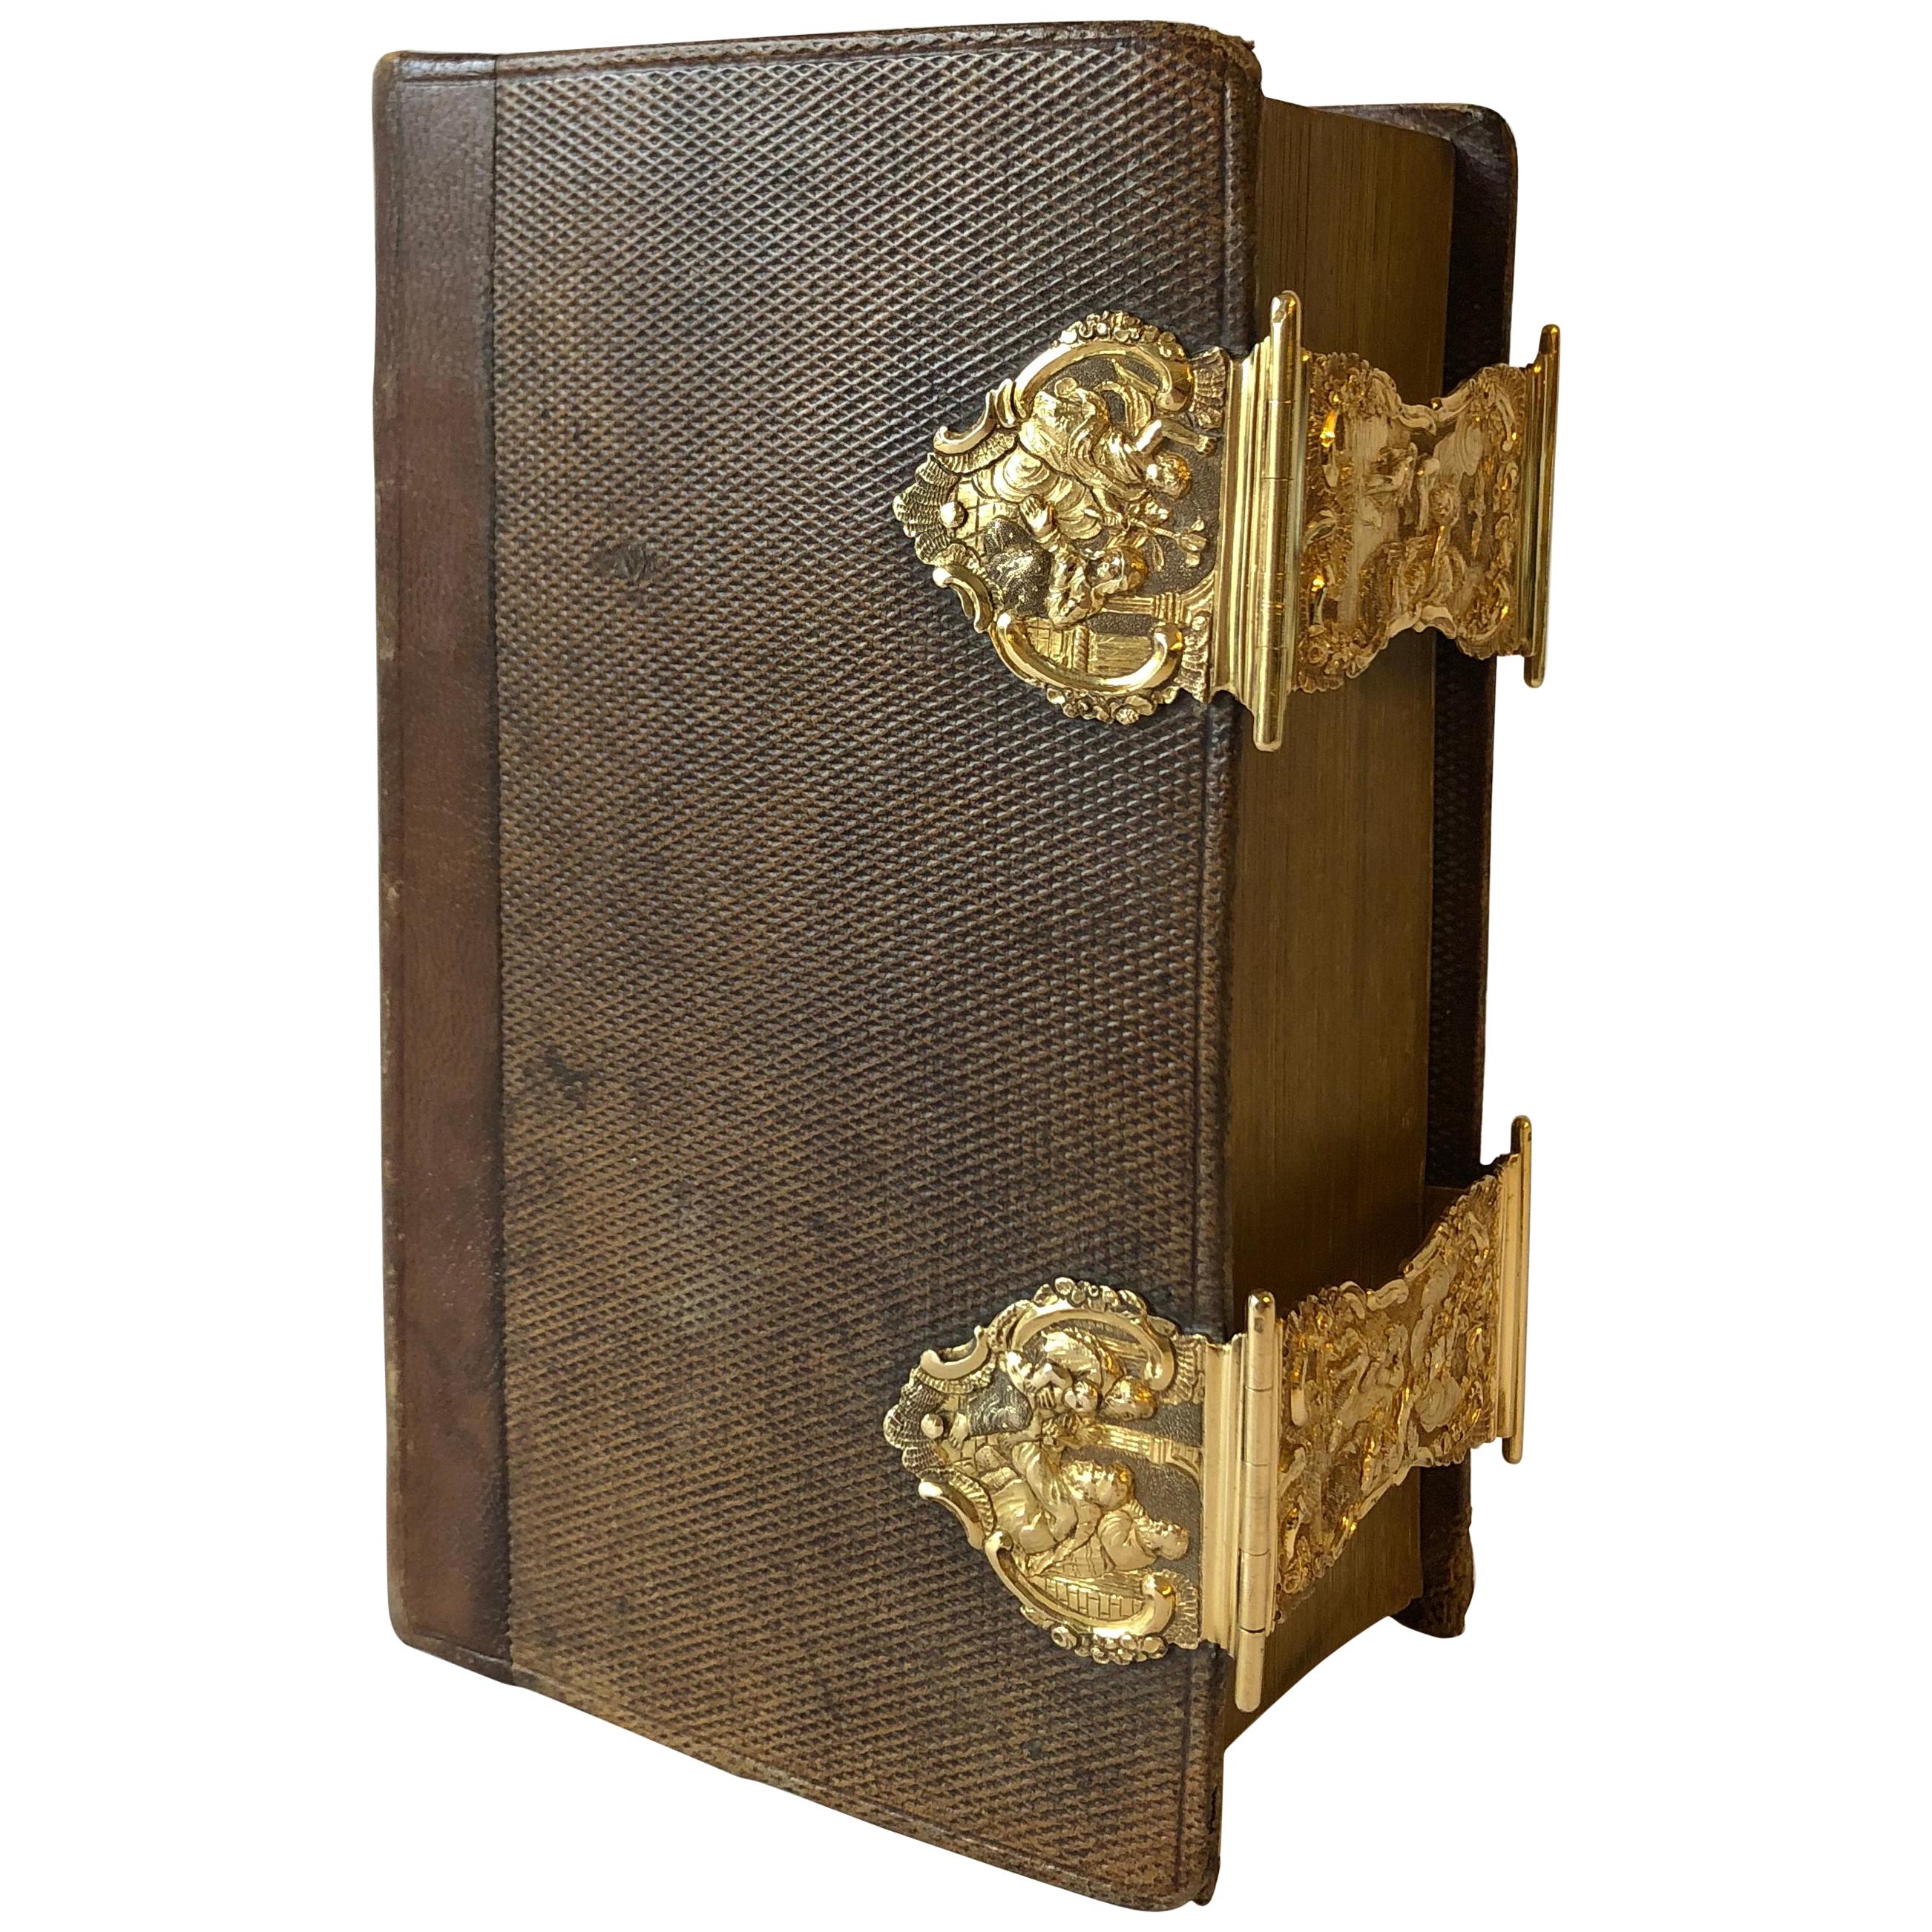 Dutch Bible with Gold Bookclasps